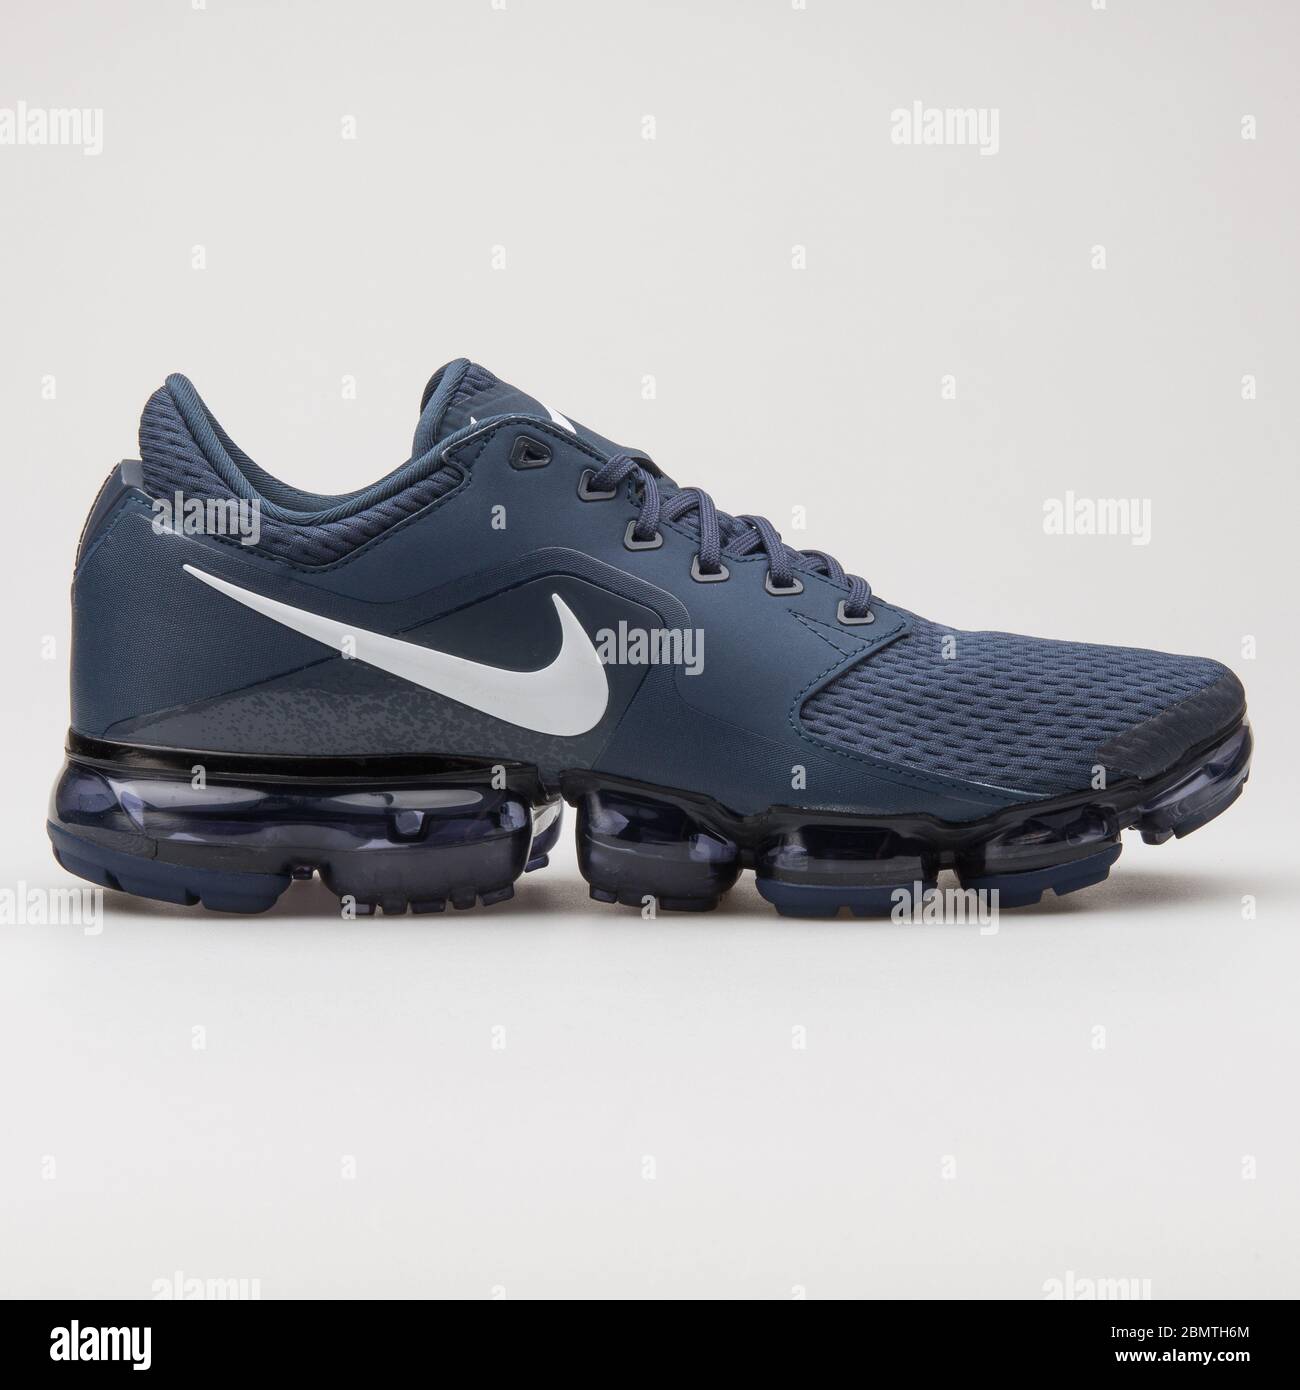 Vapormax High Resolution Stock Photography and Images - Alamy